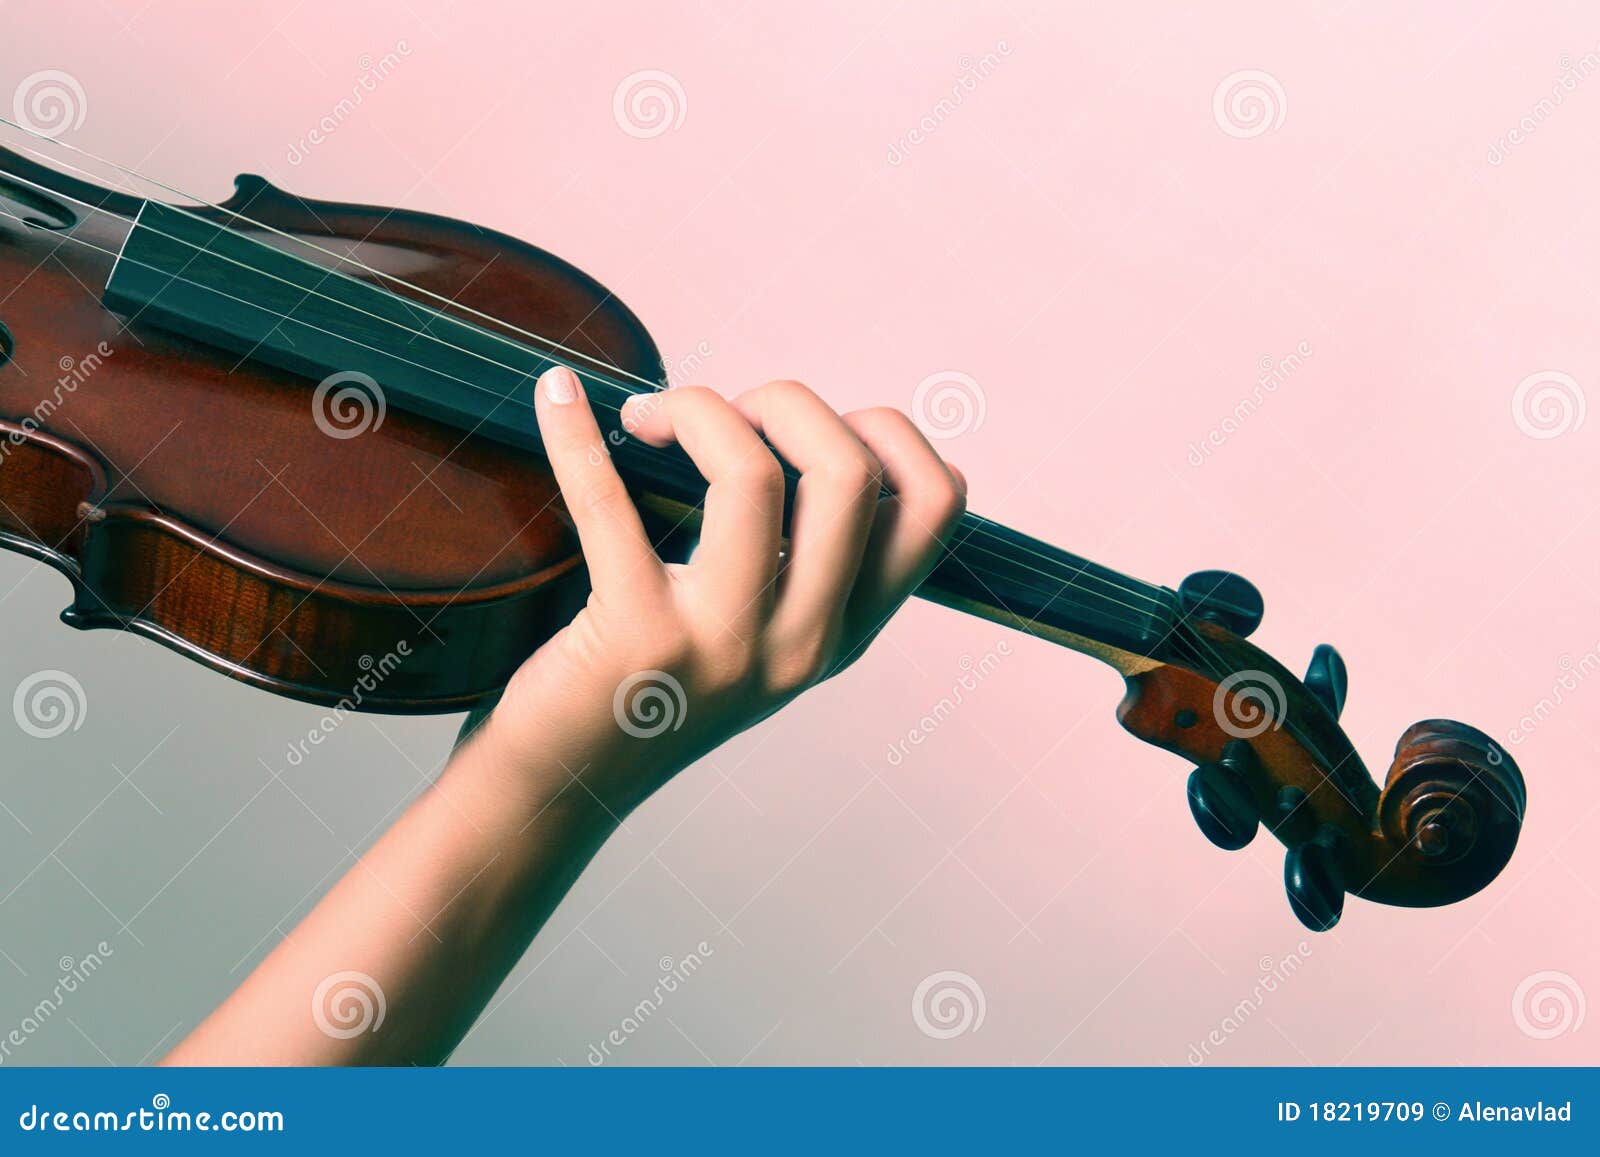 Violin with hand stock image. Image of artistic 18219709